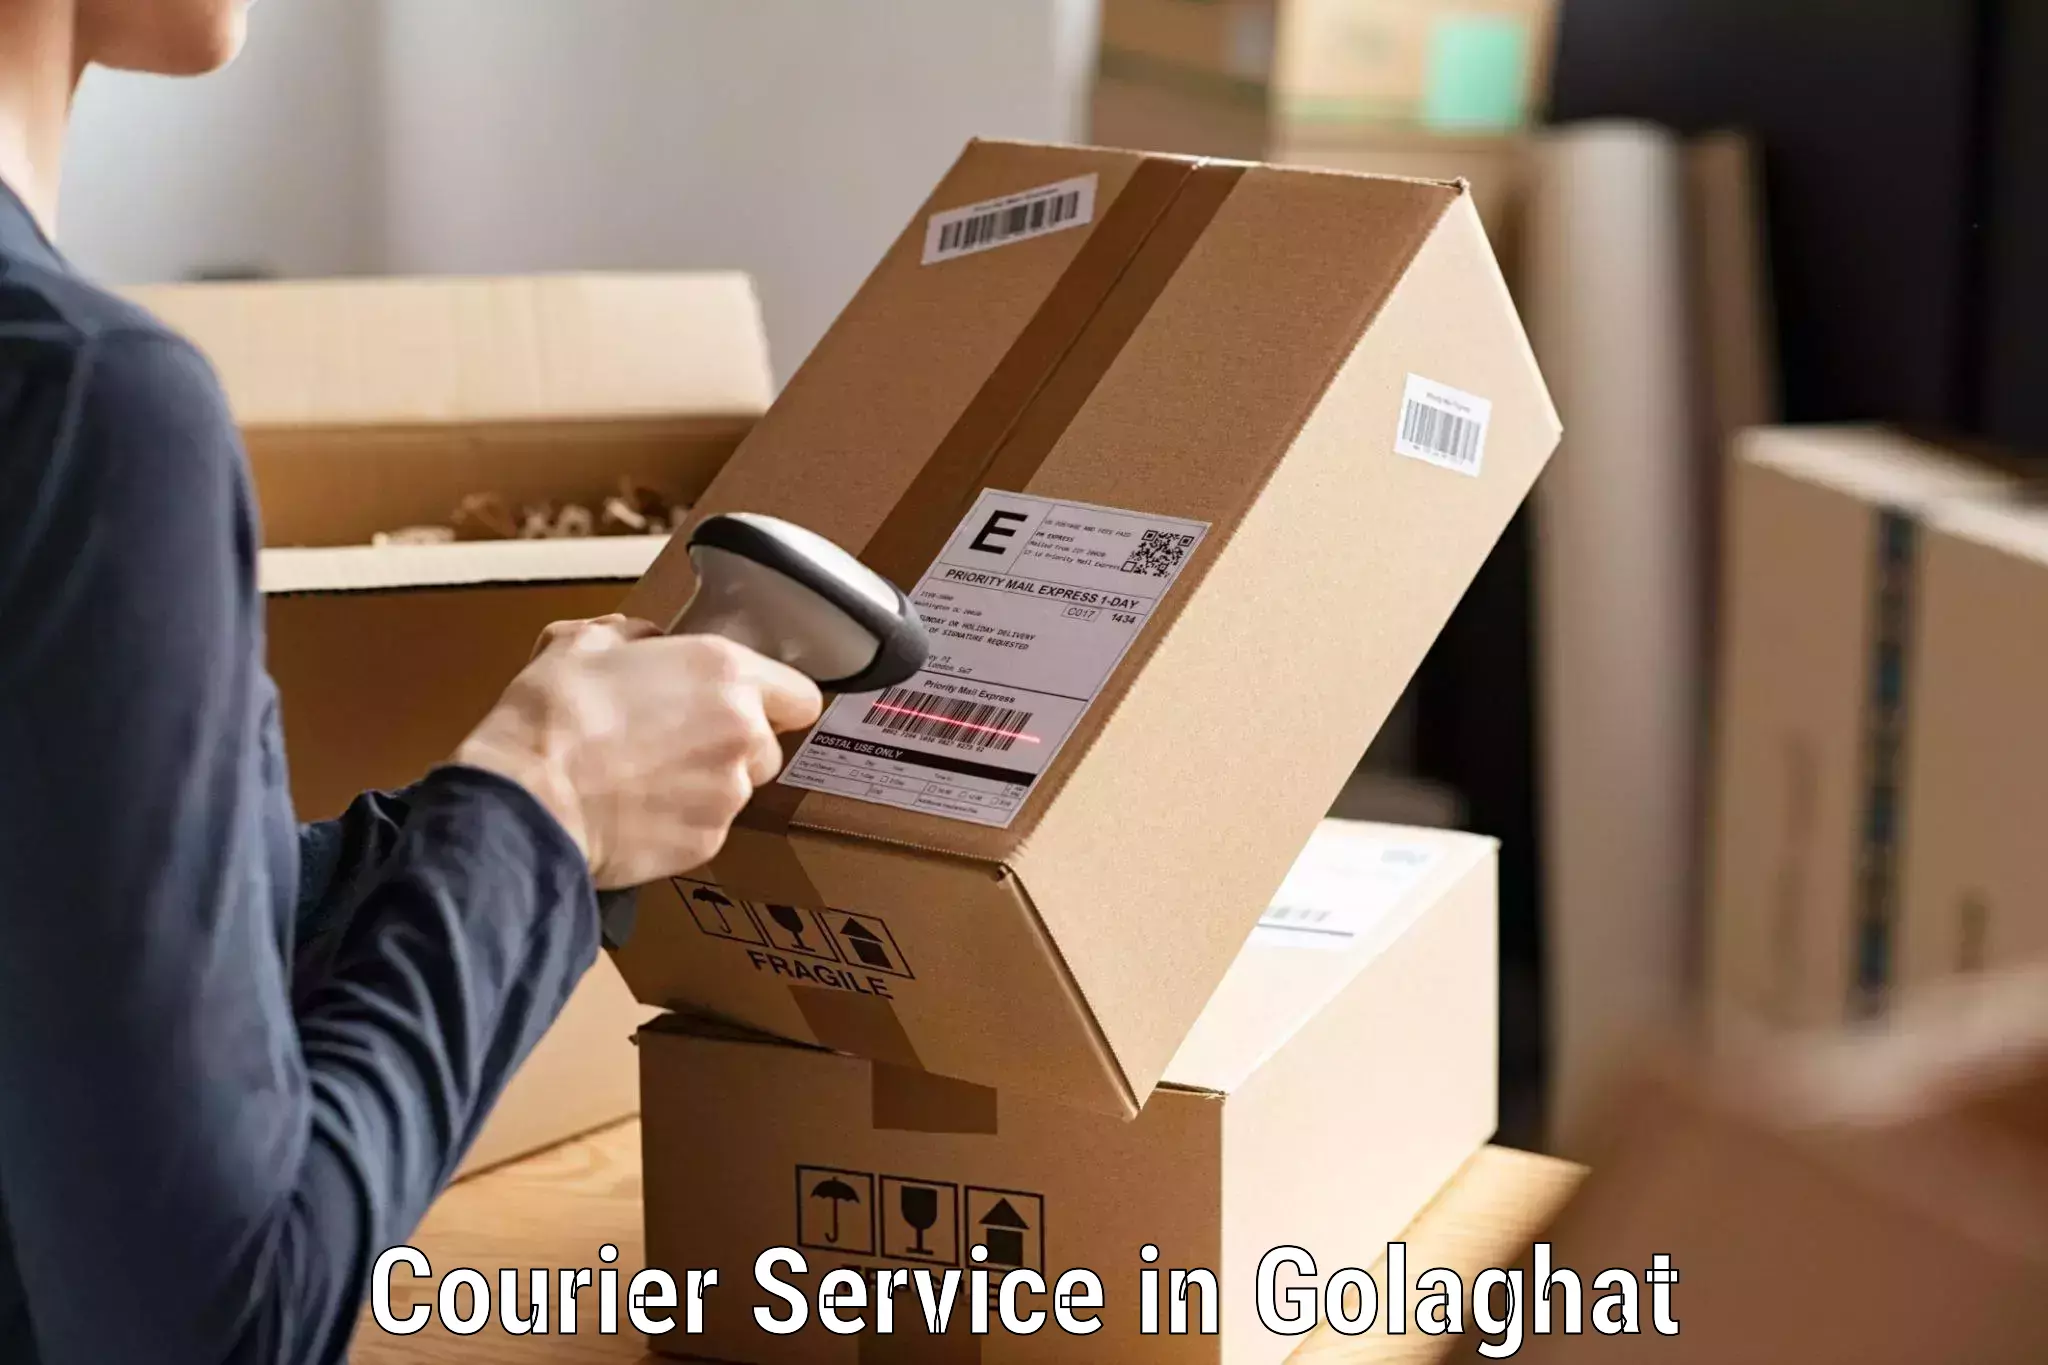 Cargo delivery service in Golaghat